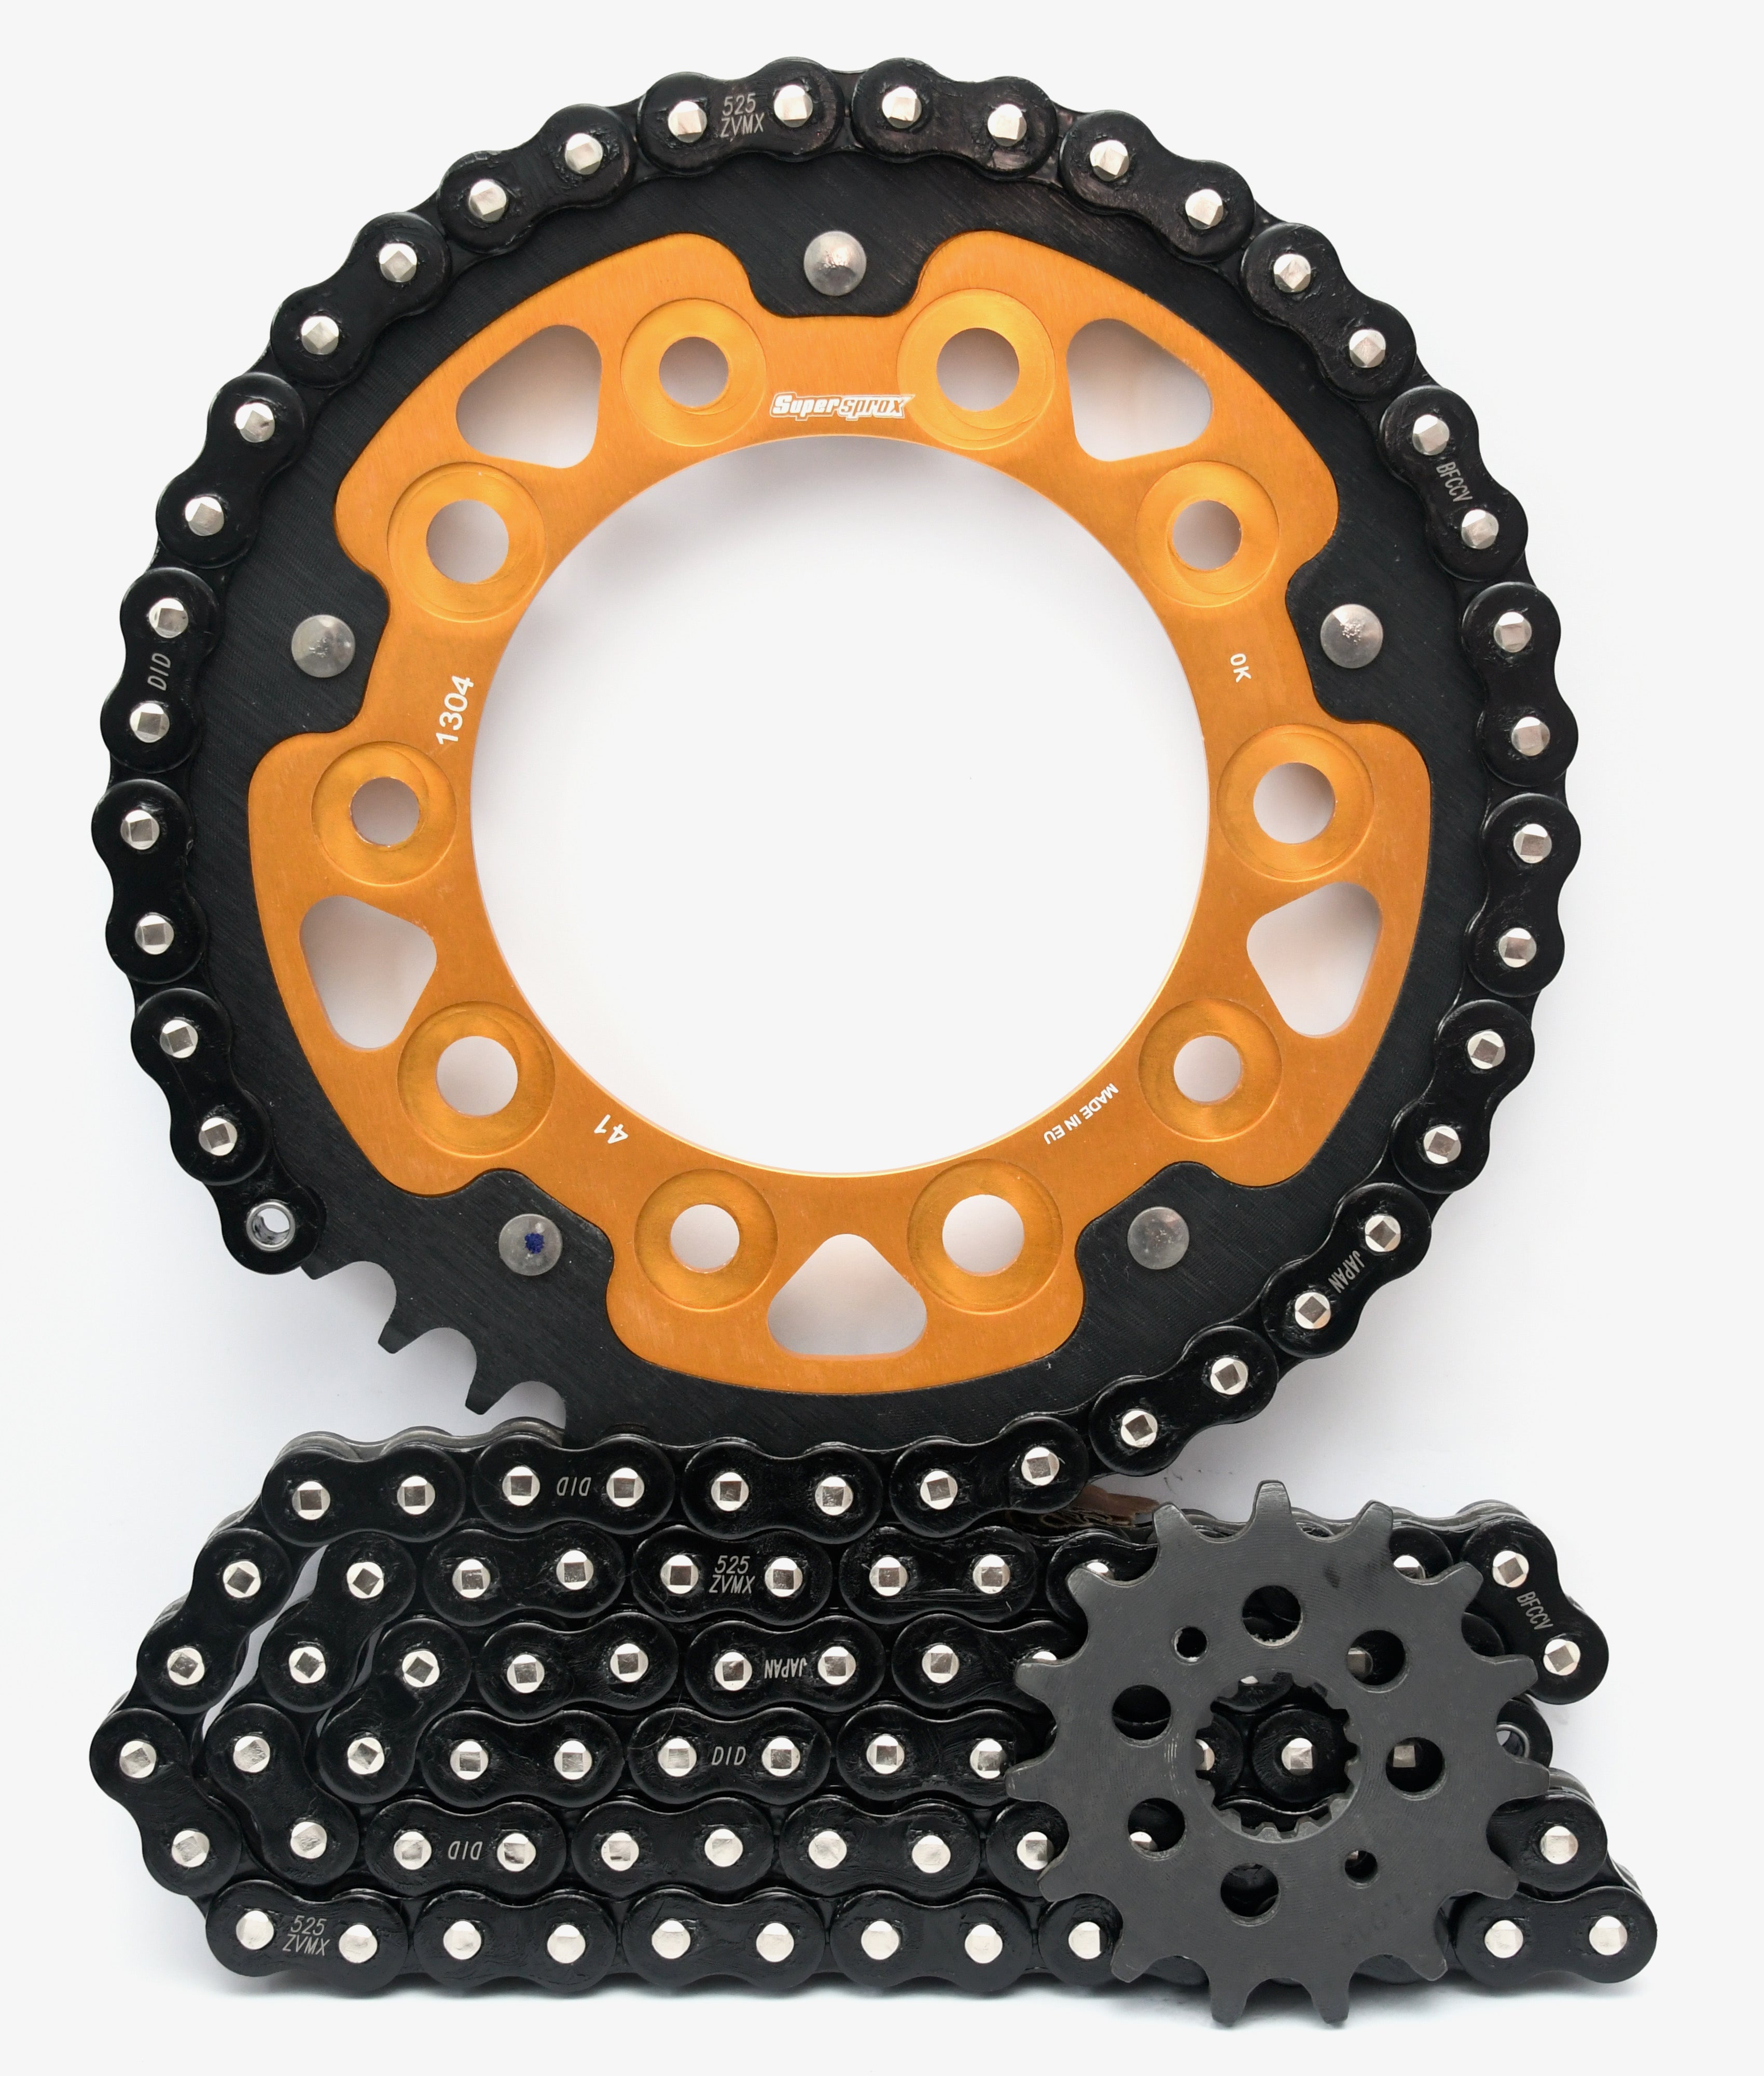 Supersprox/DID Chain & Sprocket Kit - Yamaha R1 2015> Choose Your Gearing - 0